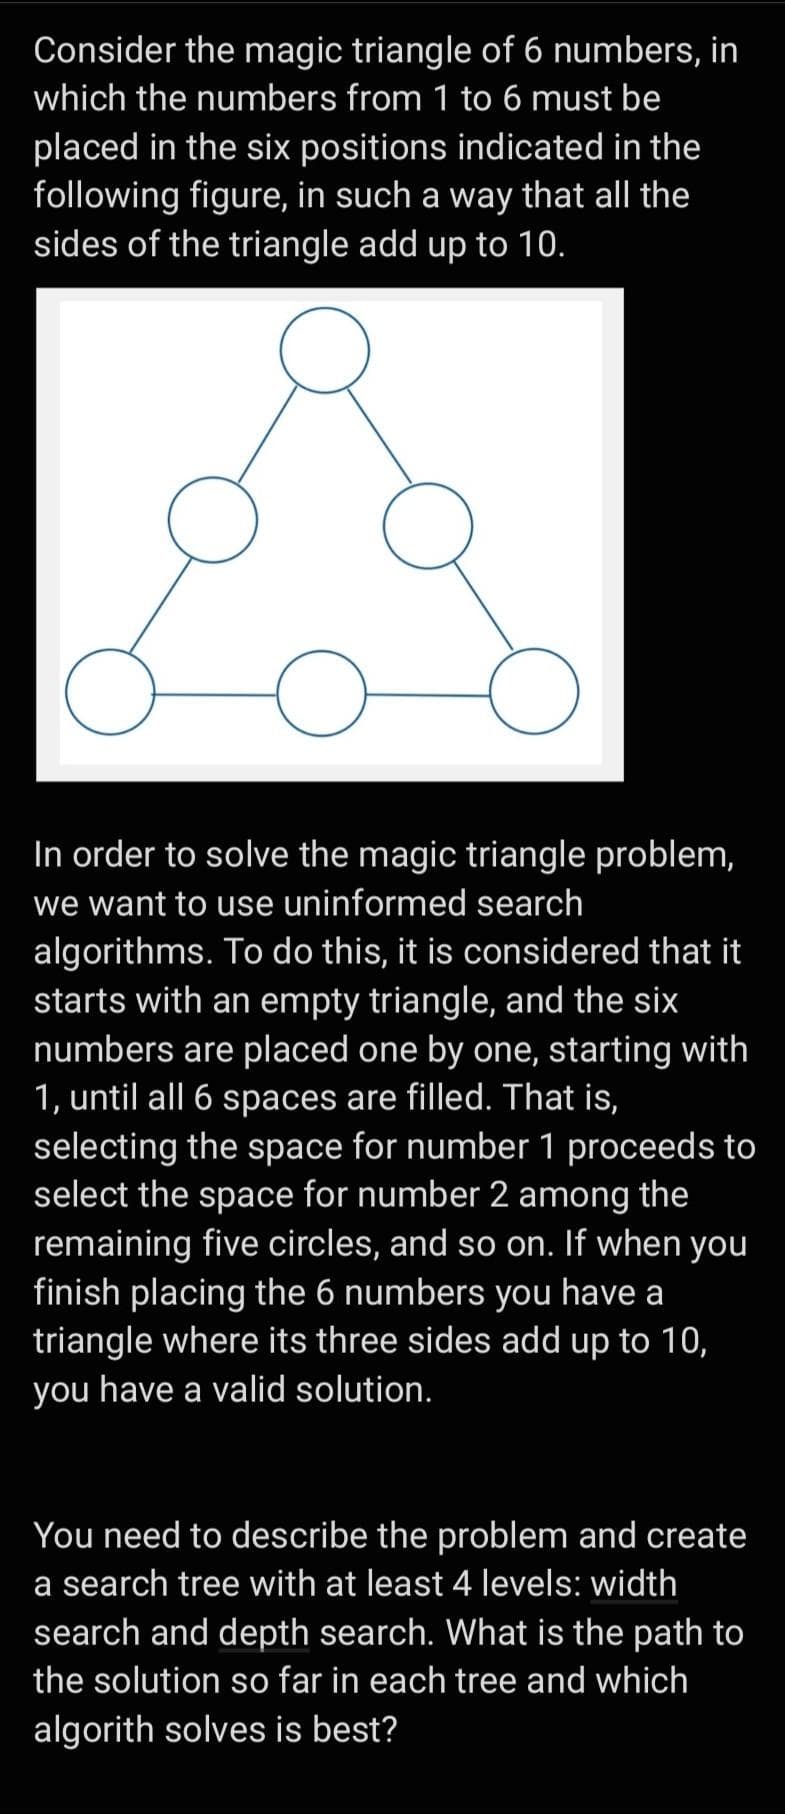 Consider the magic triangle of 6 numbers, in
which the numbers from 1 to 6 must be
placed in the six positions indicated in the
following figure, in such a way that all the
sides of the triangle add up to 10.
In order to solve the magic triangle problem,
we want to use uninformed search
algorithms. To do this, it is considered that it
starts with an empty triangle, and the six
numbers are placed one by one, starting with
1, until all 6 spaces are filled. That is,
selecting the space for number 1 proceeds to
select the space for number 2 among the
remaining five circles, and so on. If when you
finish placing the 6 numbers you have a
triangle where its three sides add up to 10,
you have a valid solution.
You need to describe the problem and create
a search tree with at least 4 levels: width
search and depth search. What is the path to
the solution so far in each tree and which
algorith solves is best?
